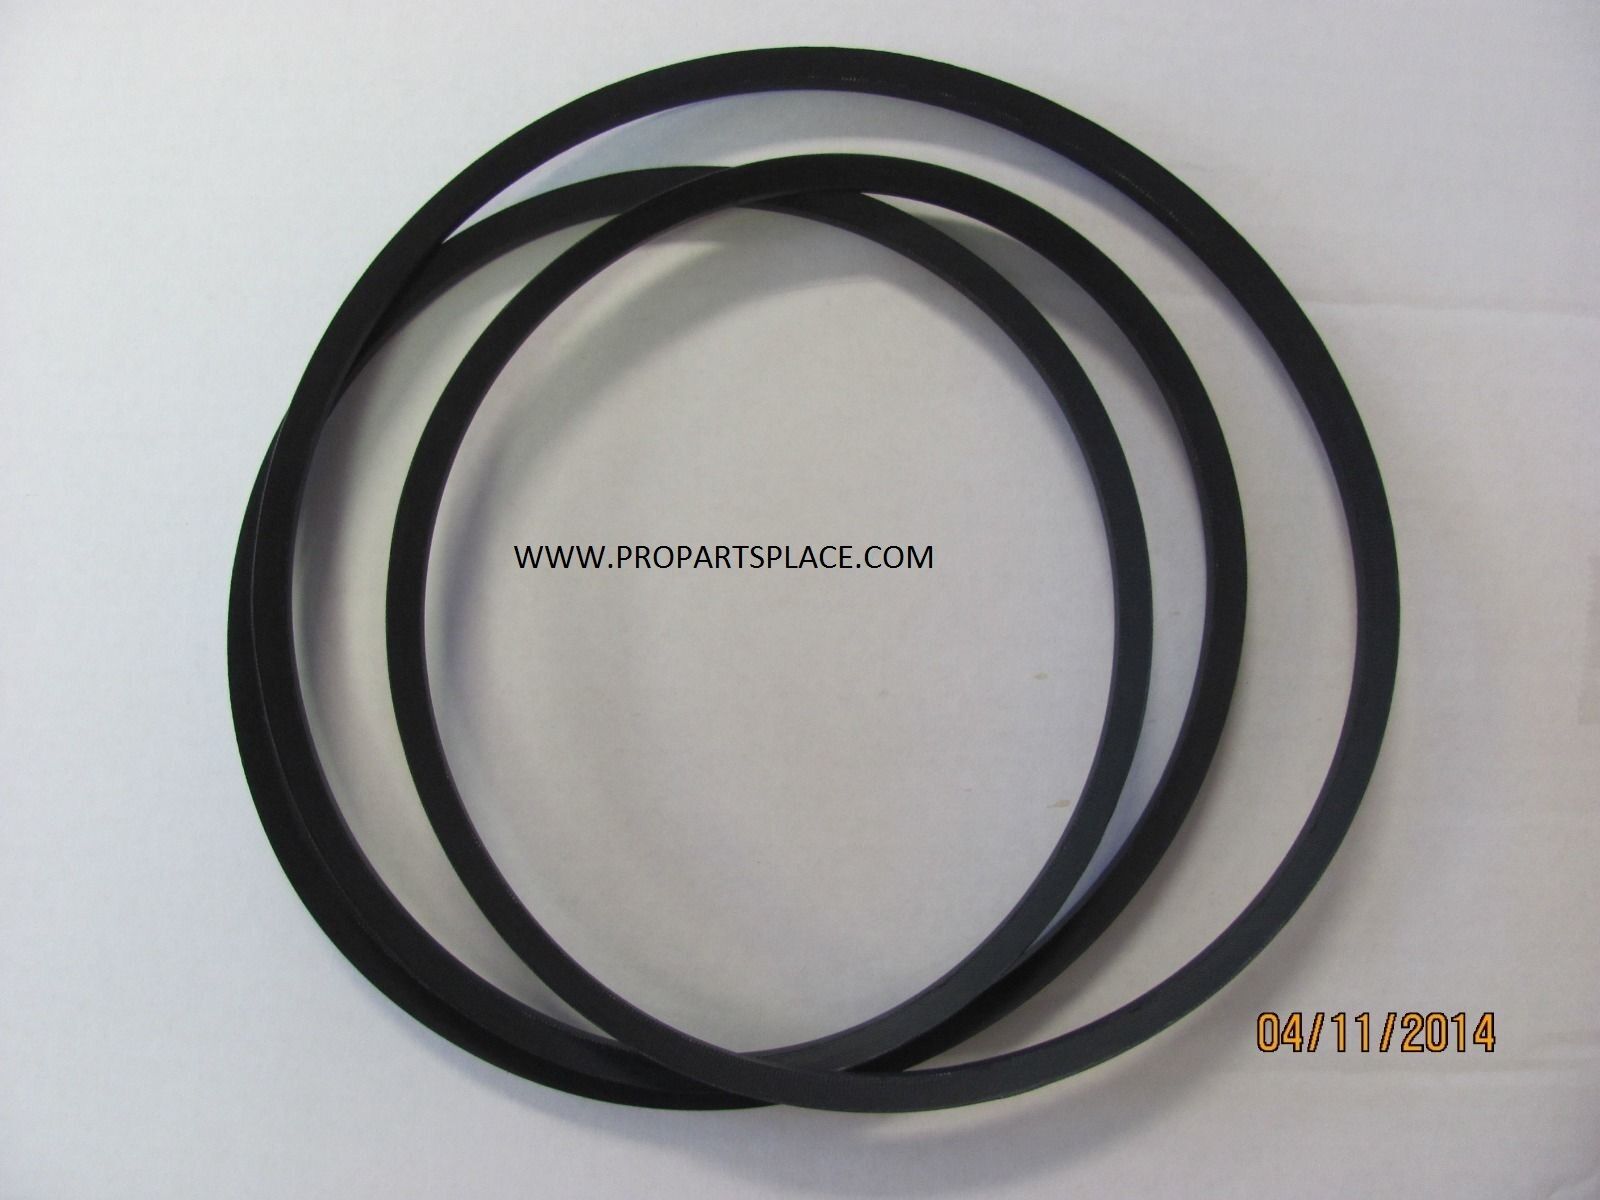 REPLACEMENT DRIVE BELT FOR HUSQVARNA 532 13 71-53, 5321371-53,532137153   1/2"